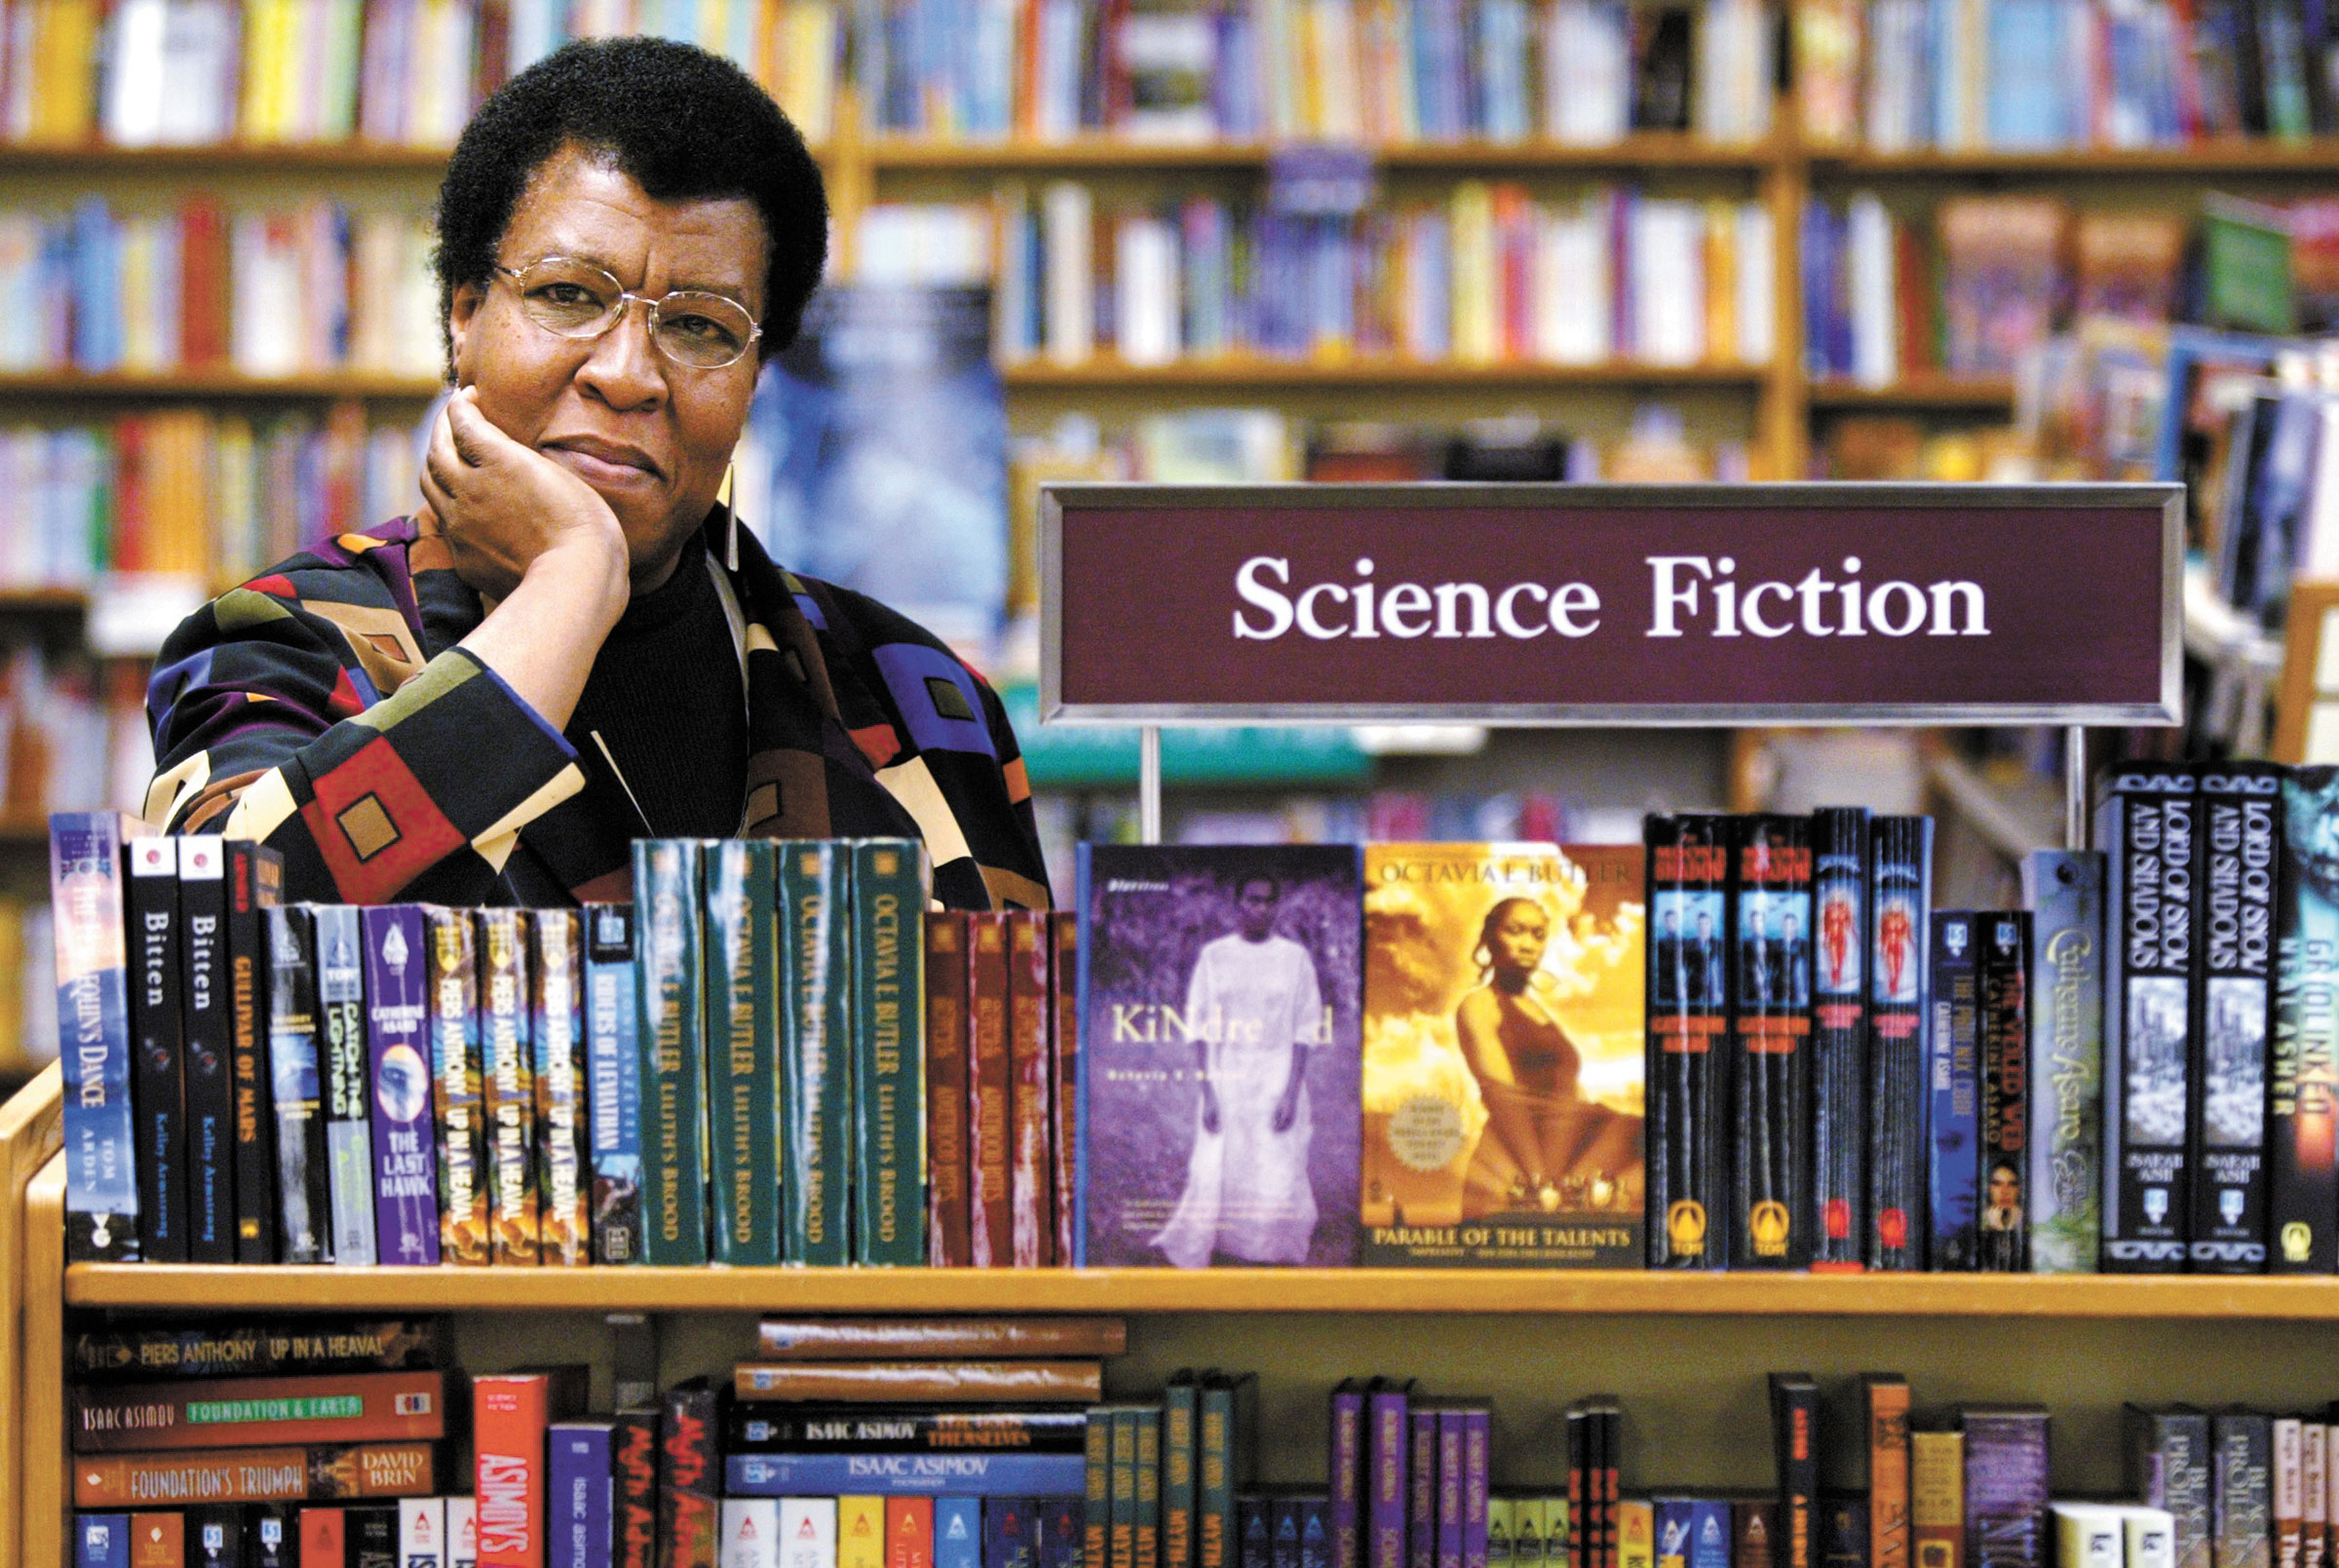 Science Fiction writer Octavia Butler poses for a photograph near some of her novels at University Book Store in Seattle, Wash., on Feb. 4, 2004. (Joshua Trujillo—Seattle Post-Intelligencer/AP)